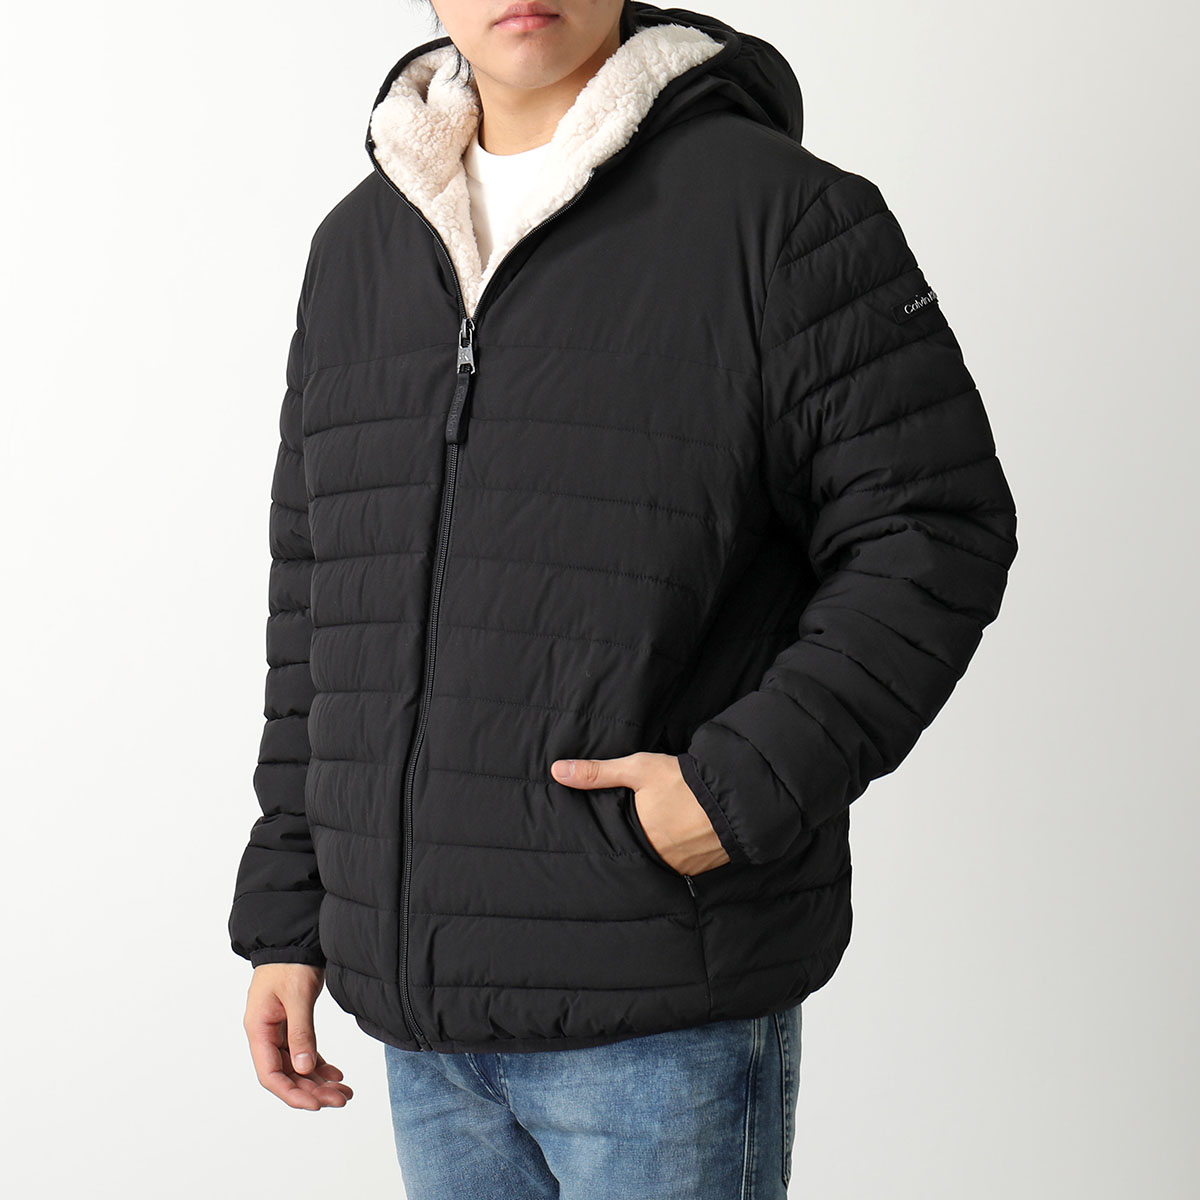 Calvin Klein カルバンクライン 中綿ジャケット SHERPA LINED HOODED STRETCH PUFFER CM155780 メンズ アウター ボア フード ロゴ BLACK｜s-musee｜02